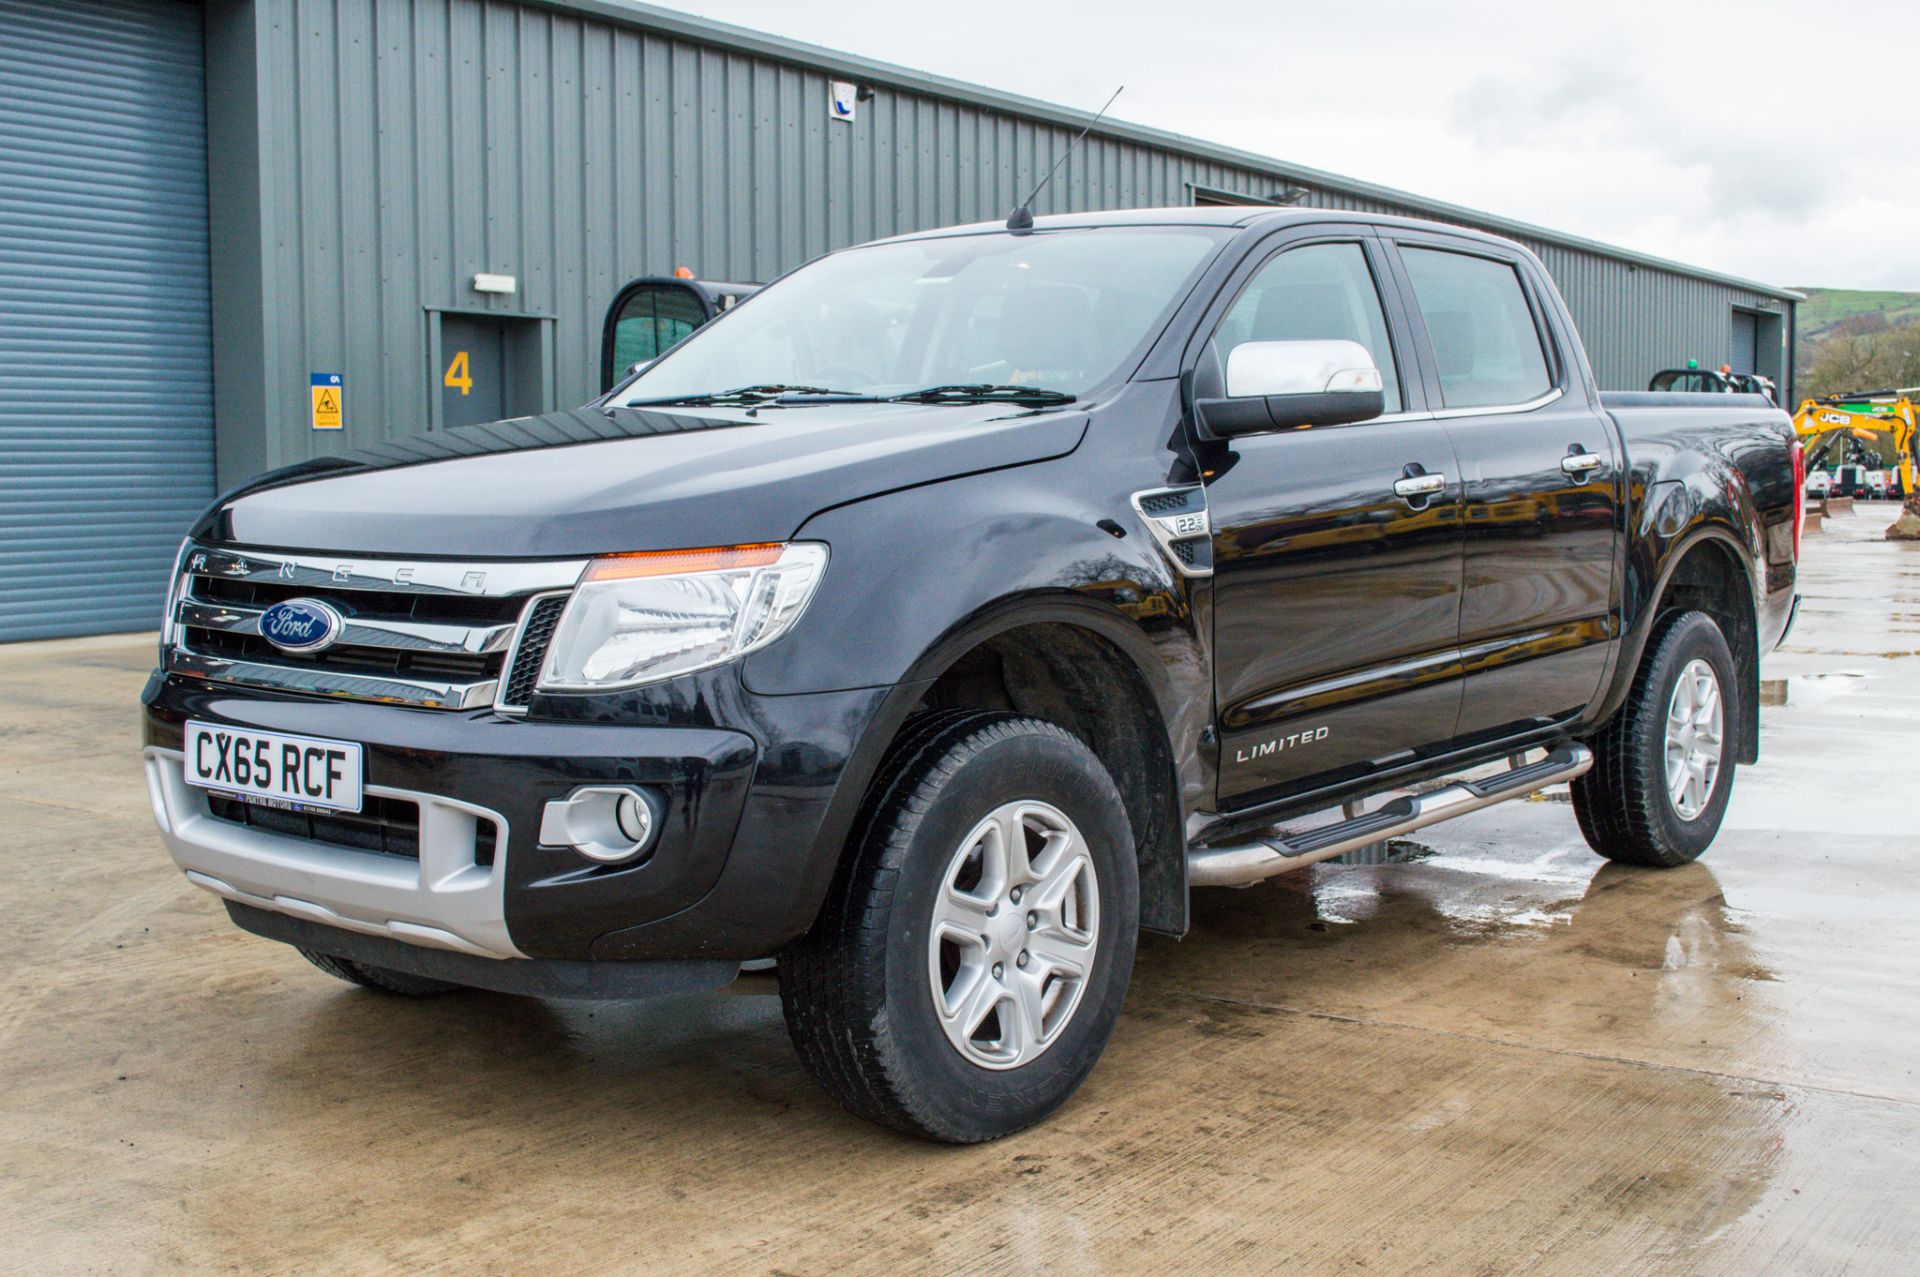 Ford Ranger 2.2 TDCI 150 Limited 4wd automatic double cab pick up